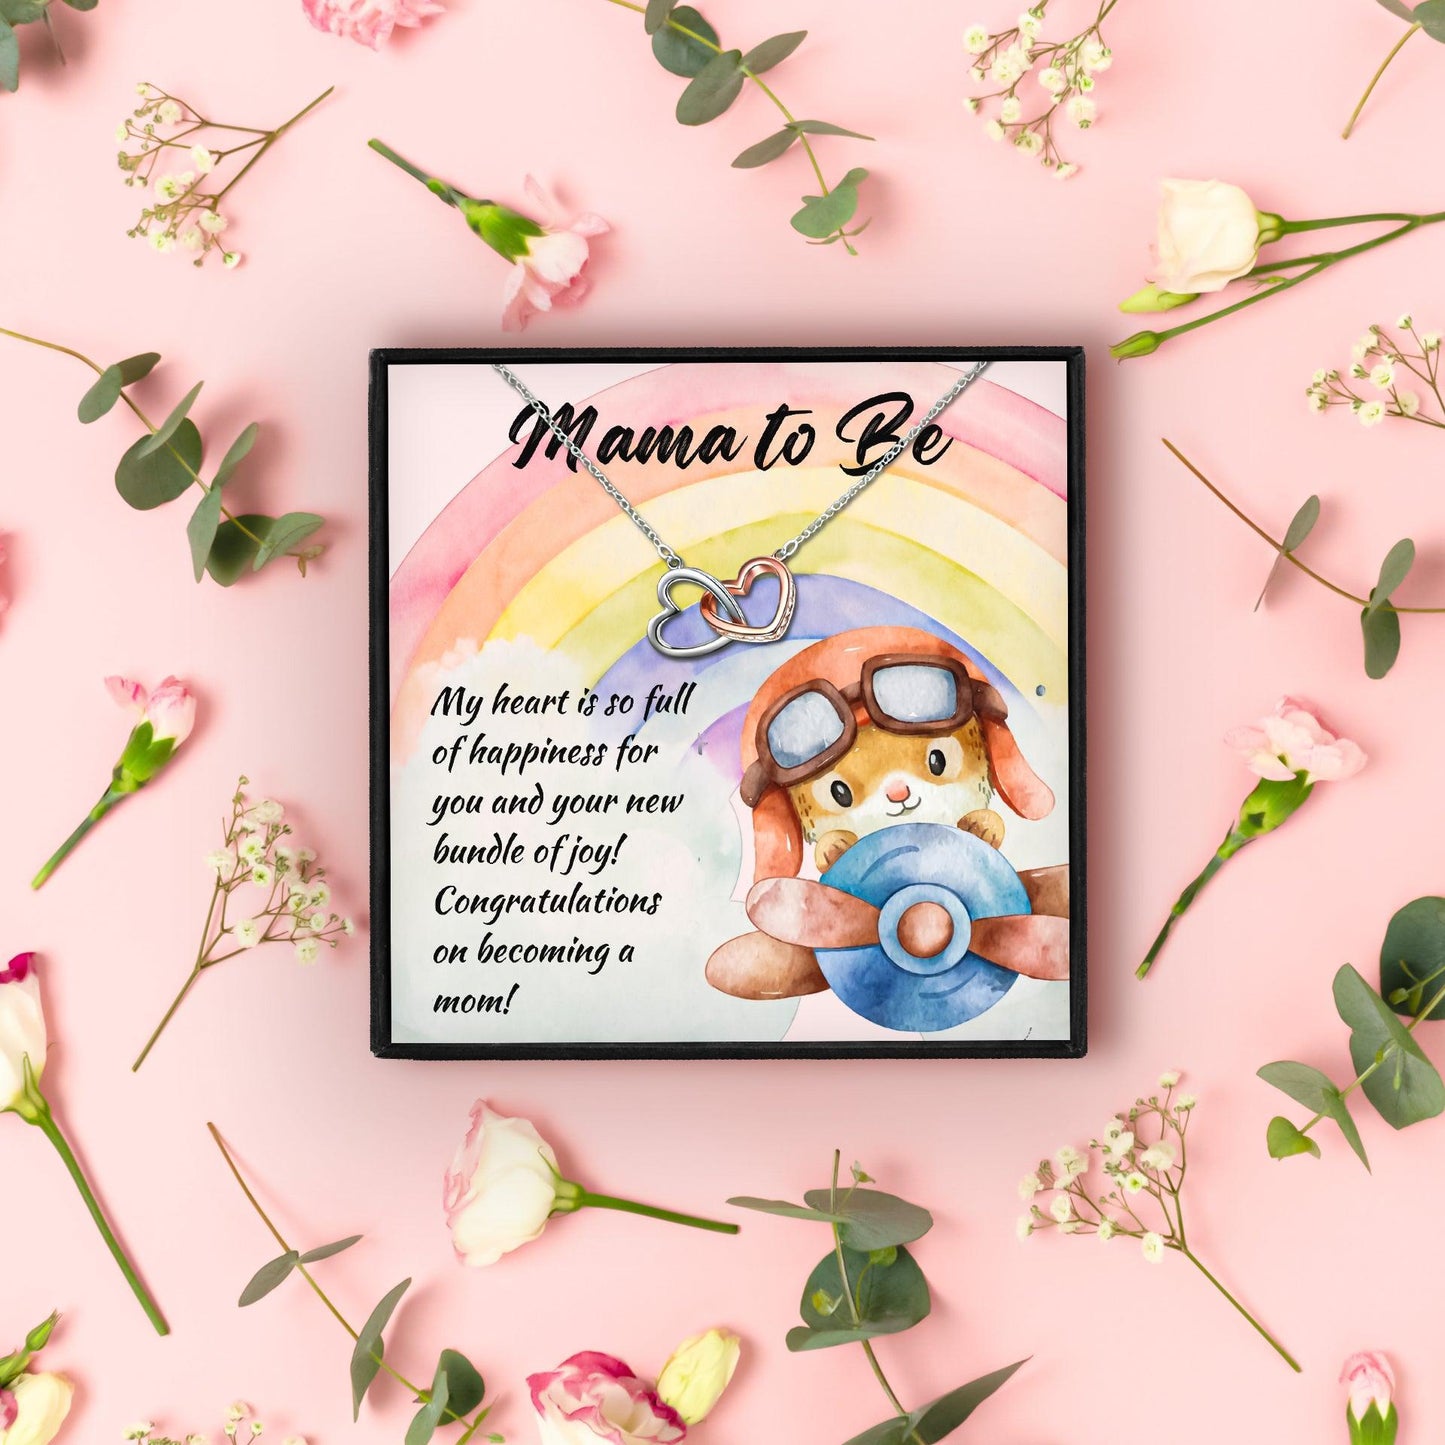 Gifts for New Moms That Will Make Her Life in 2023 | Gifts for New Moms That Will Make Her Life - undefined | Gifts for Pregnant Women, mama to be necklace, mom to be necklace, Mommy To Be Necklace, New Mom Jewelry | From Hunny Life | hunnylife.com